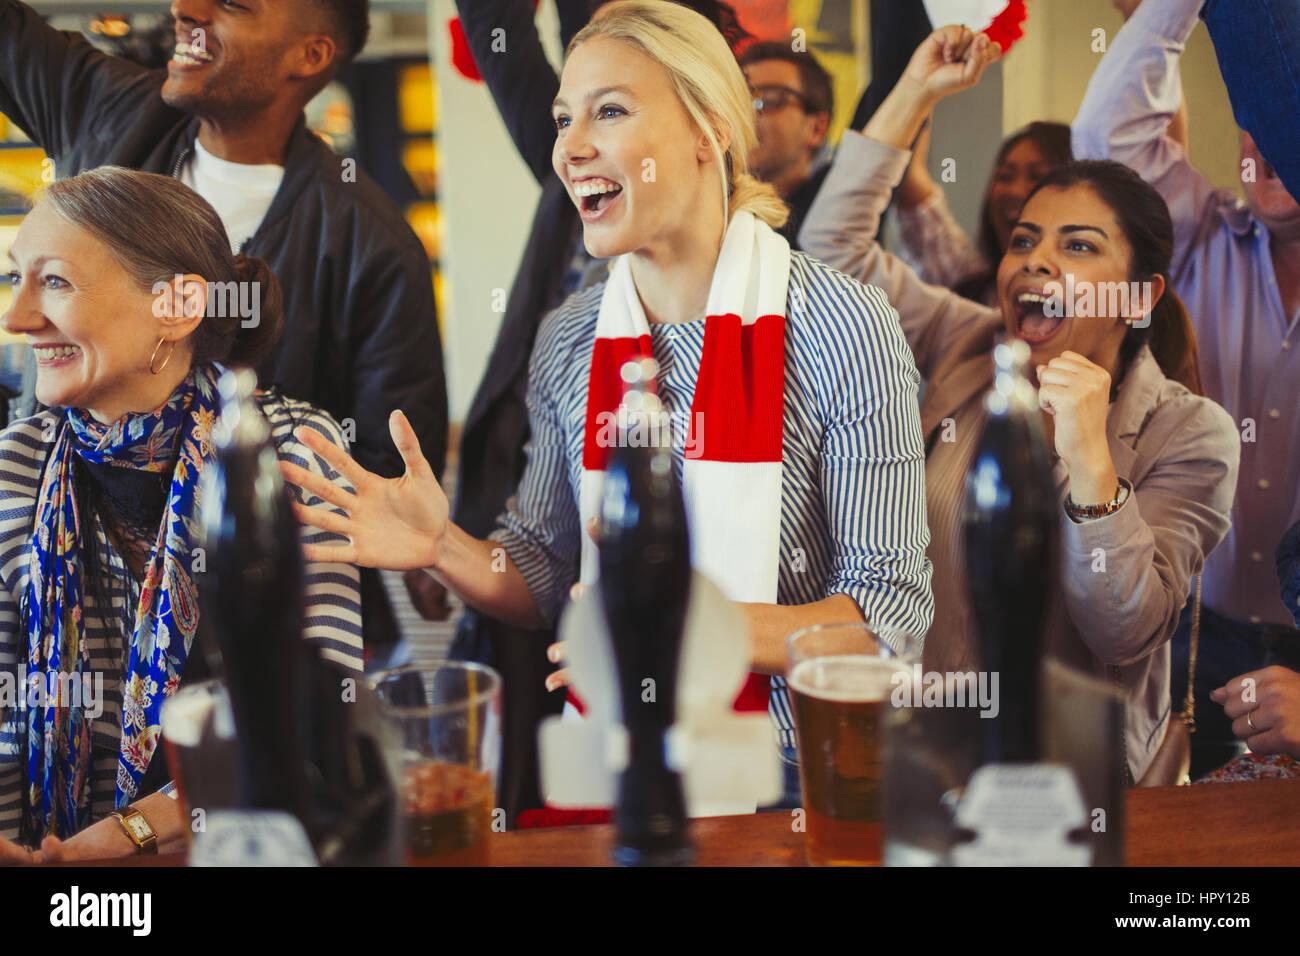 Enthusiastic sports fans cheering and watching game at bar Stock Photo